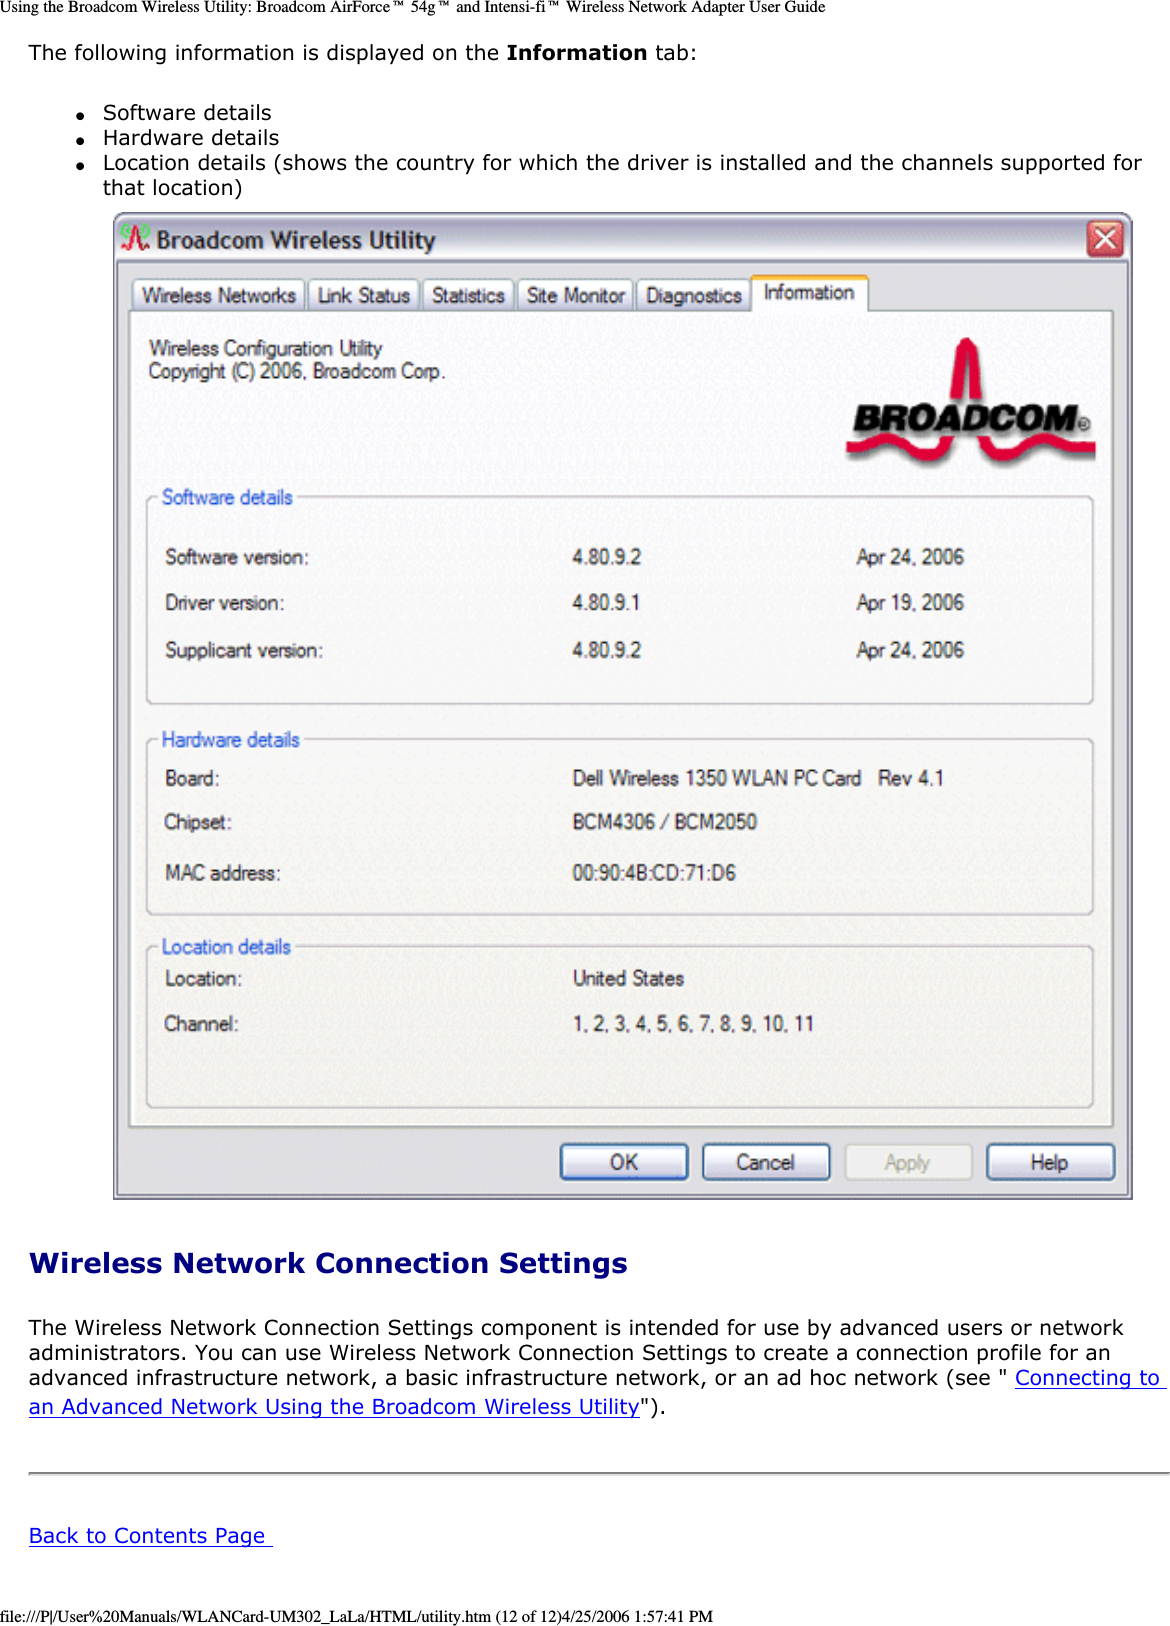 Using the Broadcom Wireless Utility: Broadcom AirForce™ 54g™ and Intensi-fi™ Wireless Network Adapter User GuideThe following information is displayed on the Information tab: ●     Software details ●     Hardware details ●     Location details (shows the country for which the driver is installed and the channels supported for that location)  Wireless Network Connection Settings The Wireless Network Connection Settings component is intended for use by advanced users or network administrators. You can use Wireless Network Connection Settings to create a connection profile for an advanced infrastructure network, a basic infrastructure network, or an ad hoc network (see &quot; Connecting to an Advanced Network Using the Broadcom Wireless Utility&quot;). Back to Contents Page file:///P|/User%20Manuals/WLANCard-UM302_LaLa/HTML/utility.htm (12 of 12)4/25/2006 1:57:41 PM